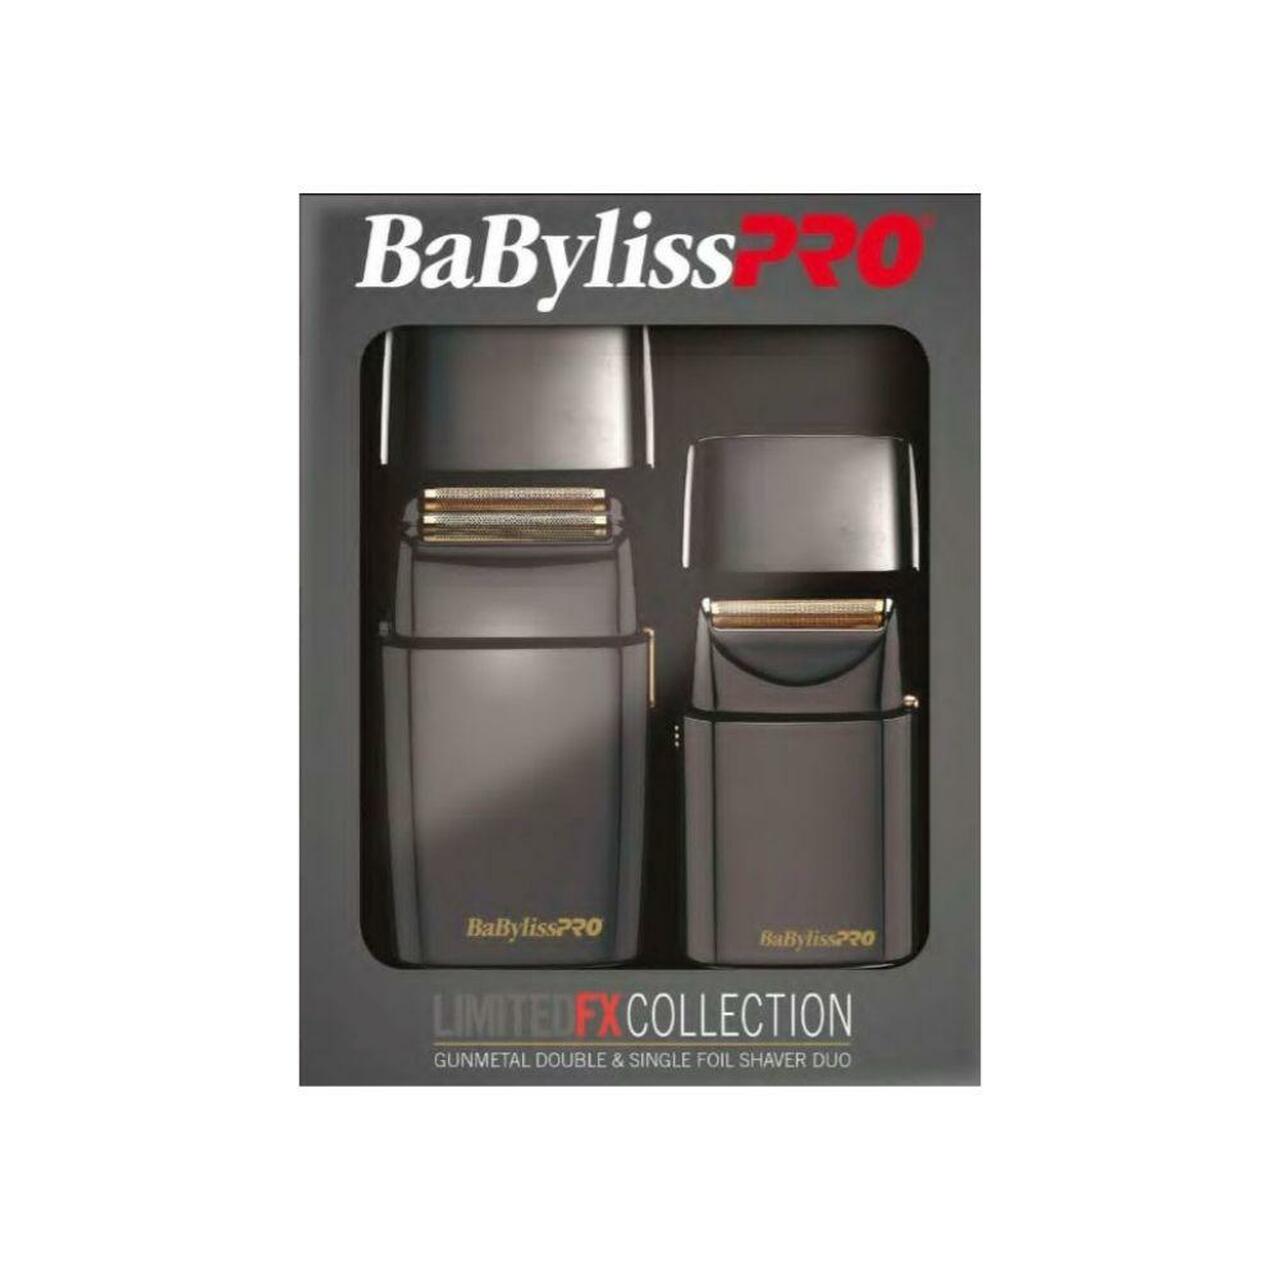 BaByliss PRO Limited FX Collection Double and Single Foil GunMetal Shaver Duo